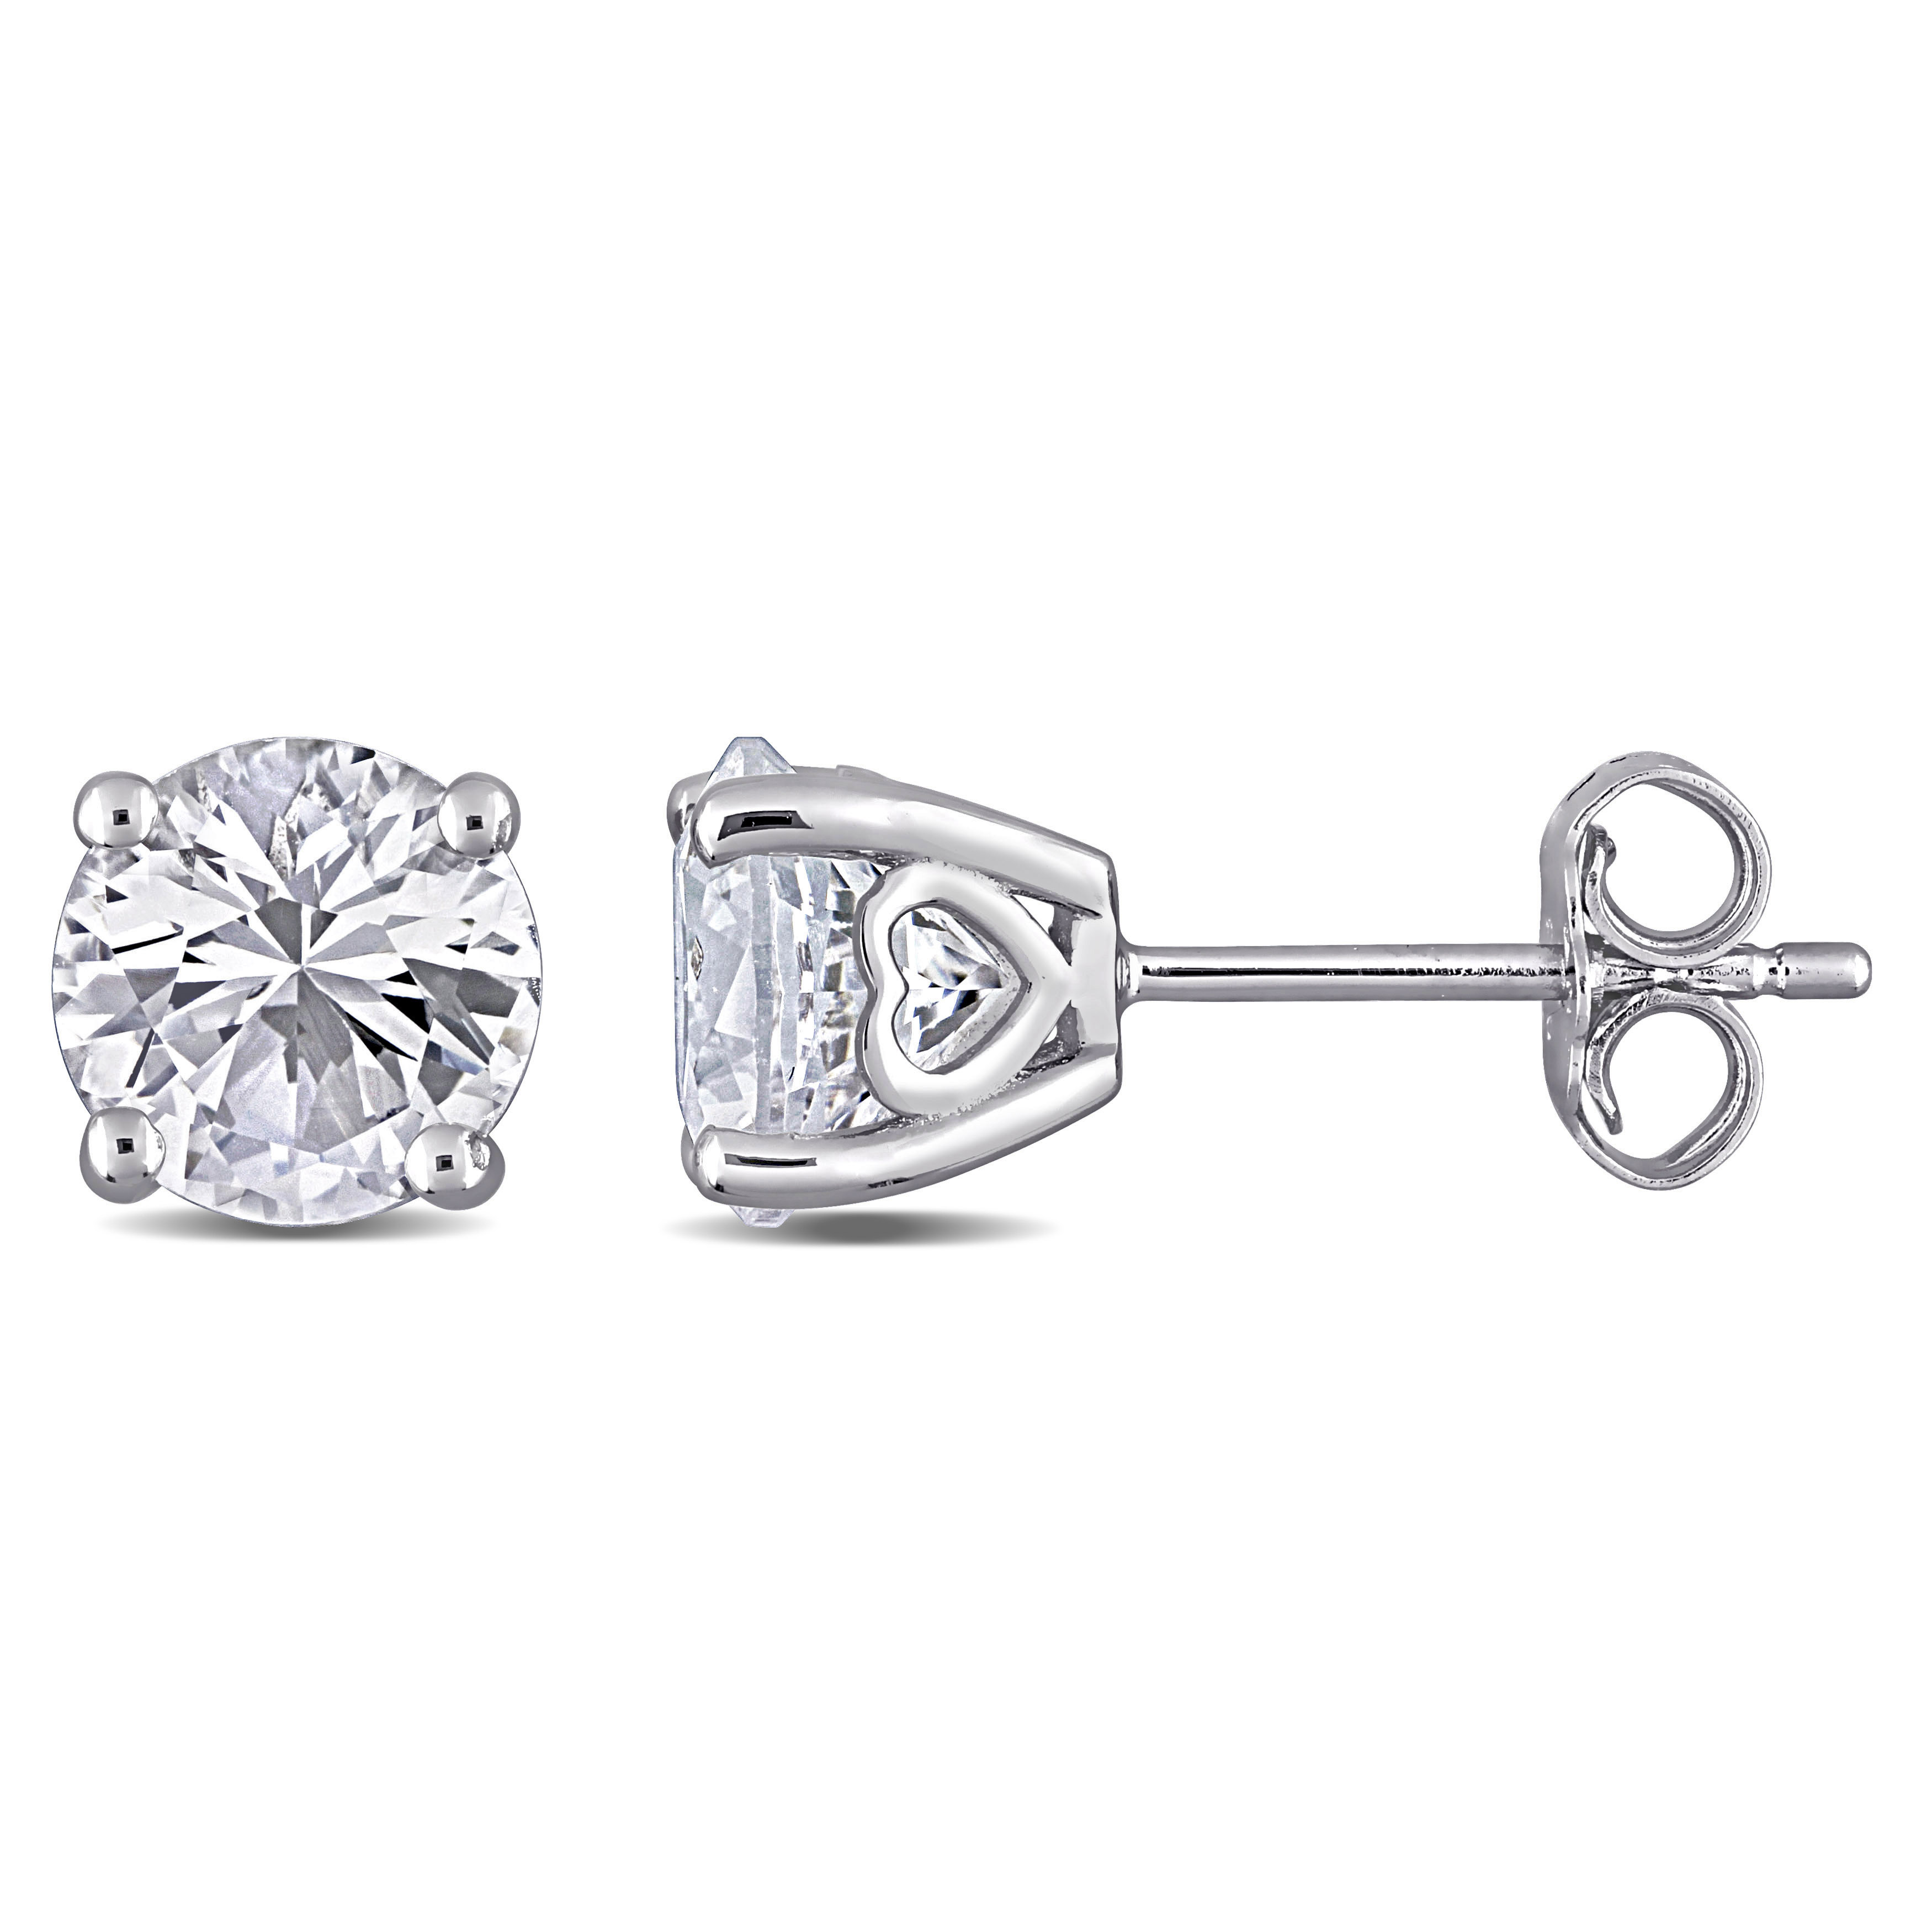 3 1/4 CT TGW Created White Sapphire Solitaire Stud Earrings in Sterling Silver